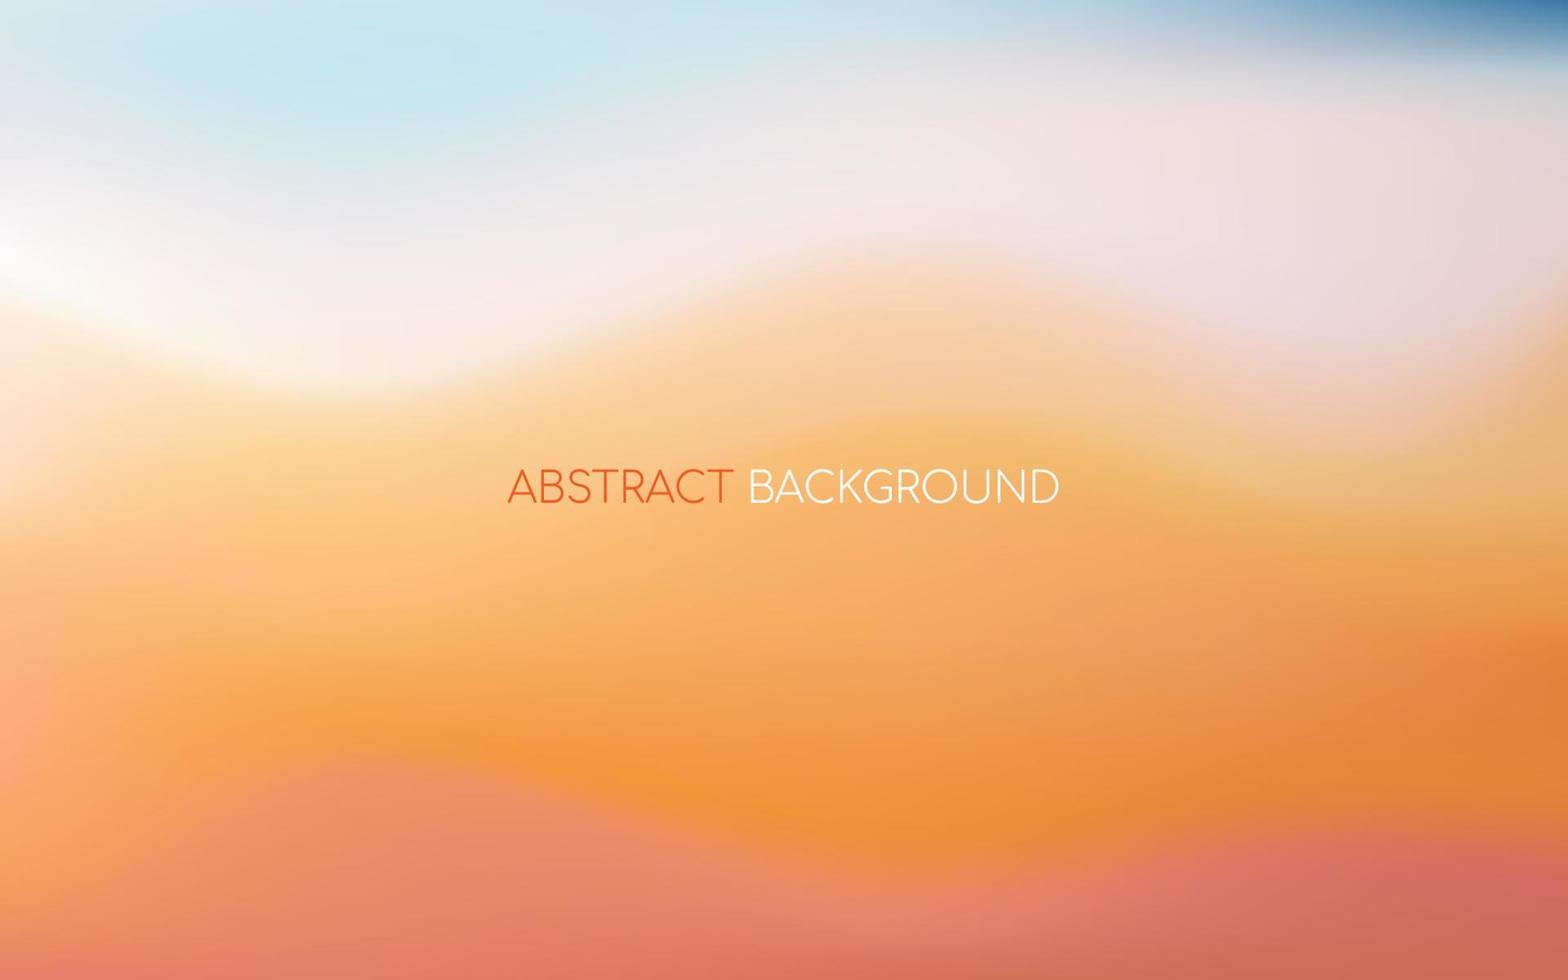 Abstract colorful fluid gradient landscape background with text, can be use for Cover, Flyer, Presentation, Advertising, Business, Banner, Backdrop, Website, Landing Page and Mobile Usage. vector